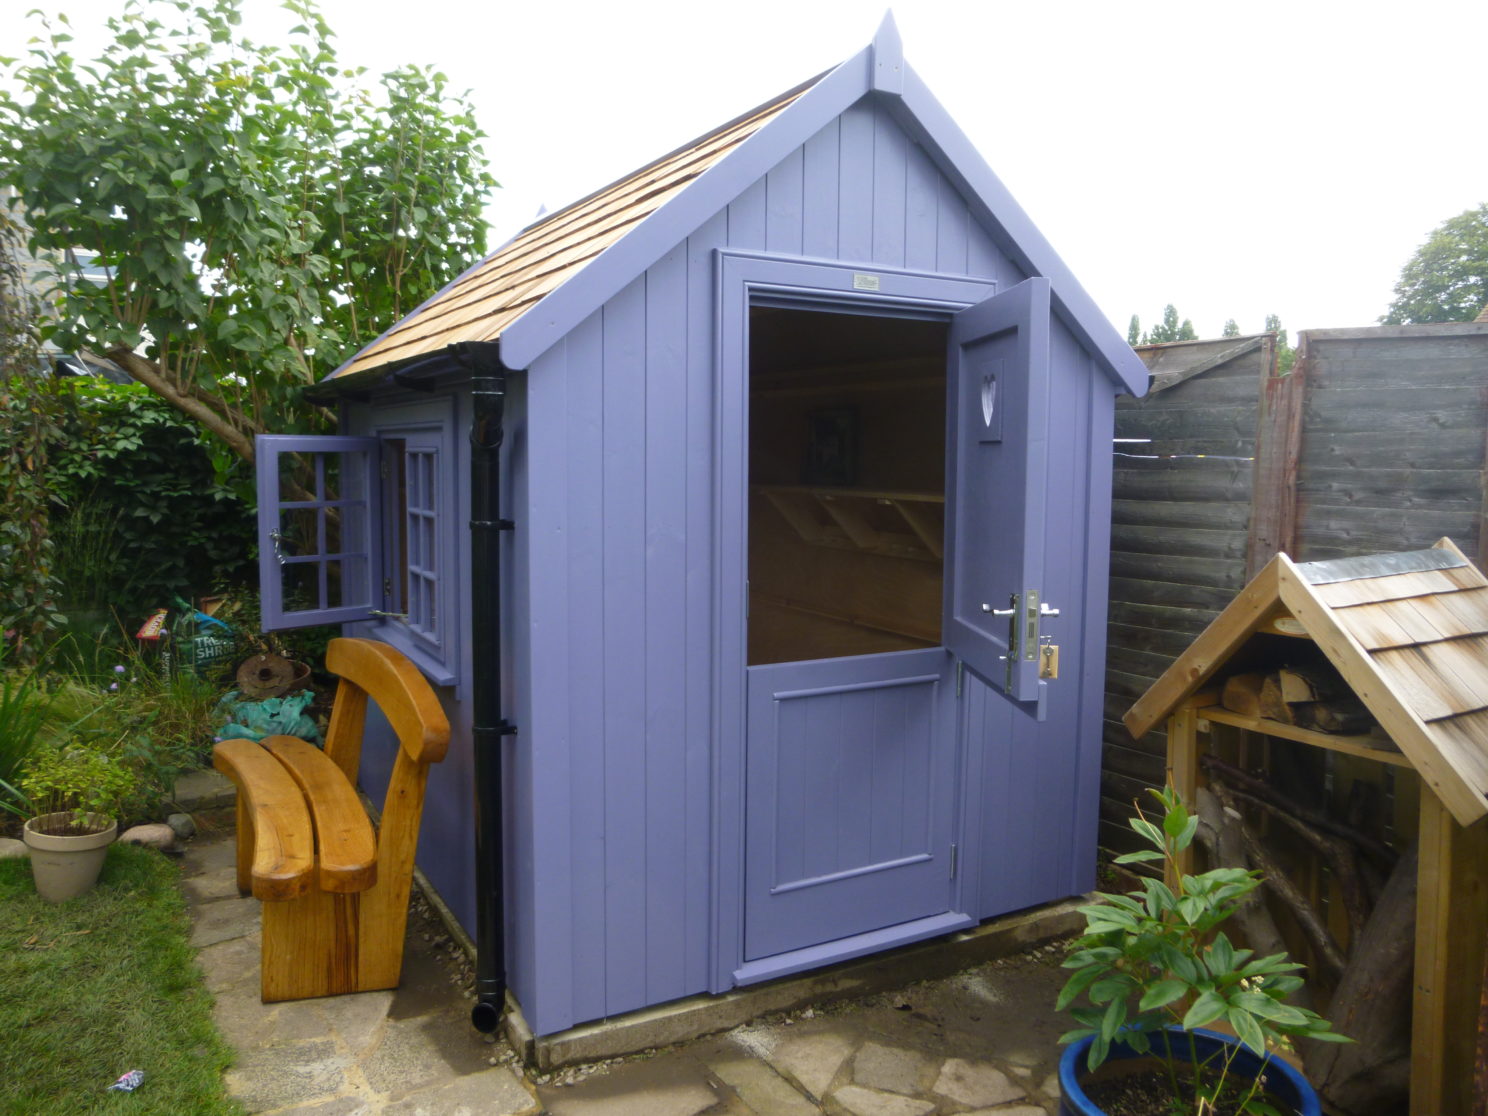 Purple Potting shed with stable door